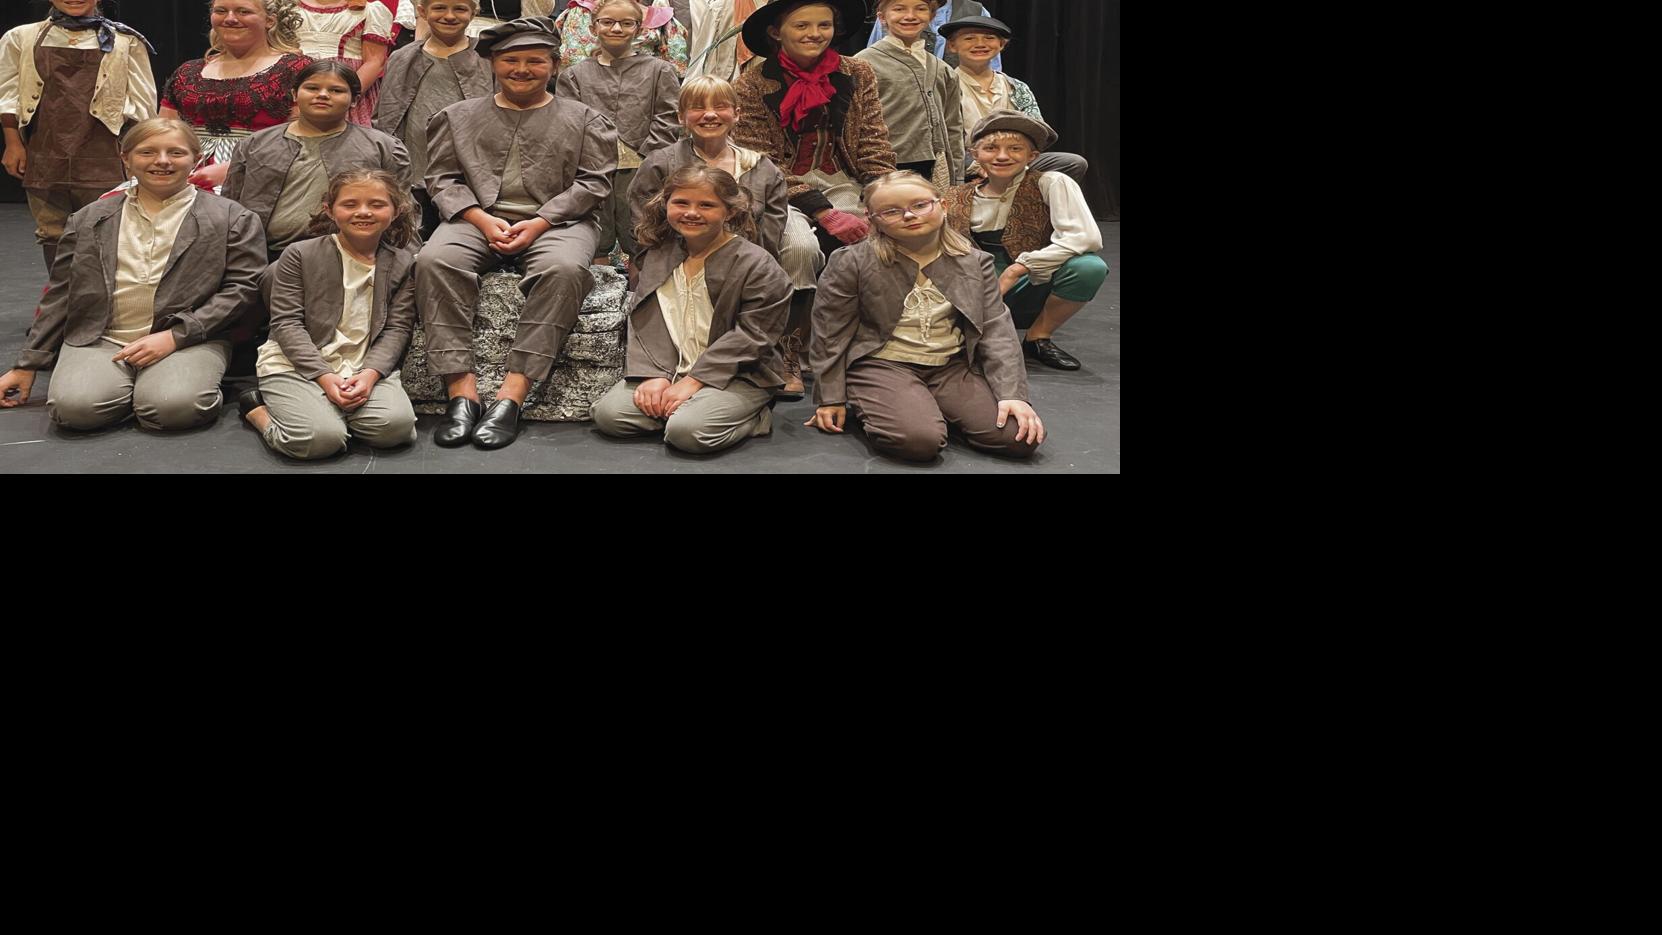 Grand Rapids Players returns for 15th year of summer theatre camp